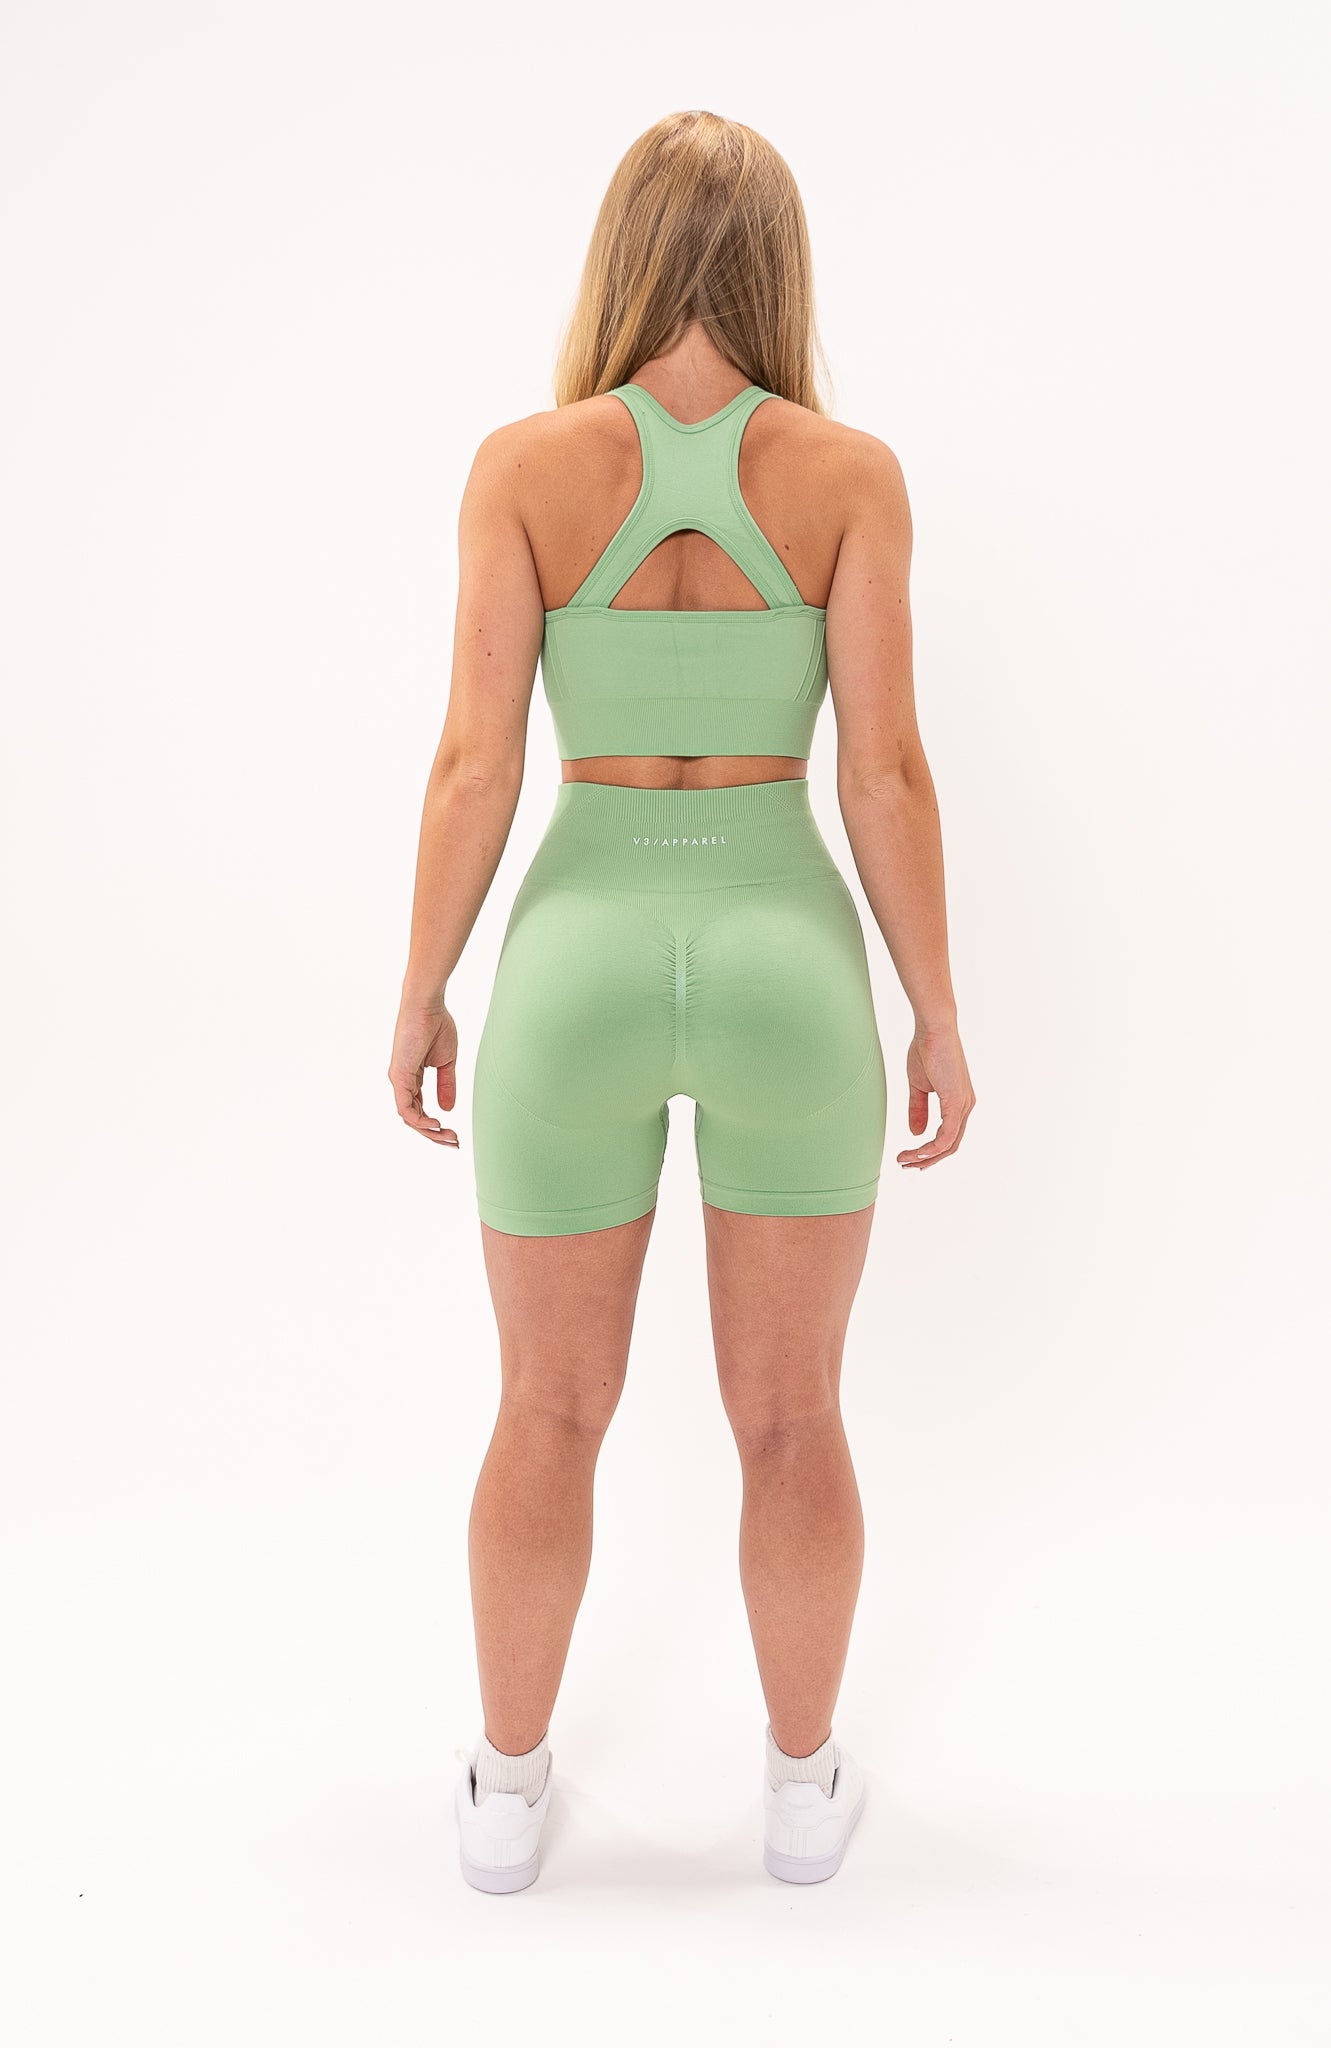 redbaysand Women's Tempo seamless scrunch bum shaping high waisted shorts and training sports bra in mint green – Squat proof 5 inch leg cycle shorts and training bra for Gym workouts training, Running, yoga, bodybuilding and bikini fitness.